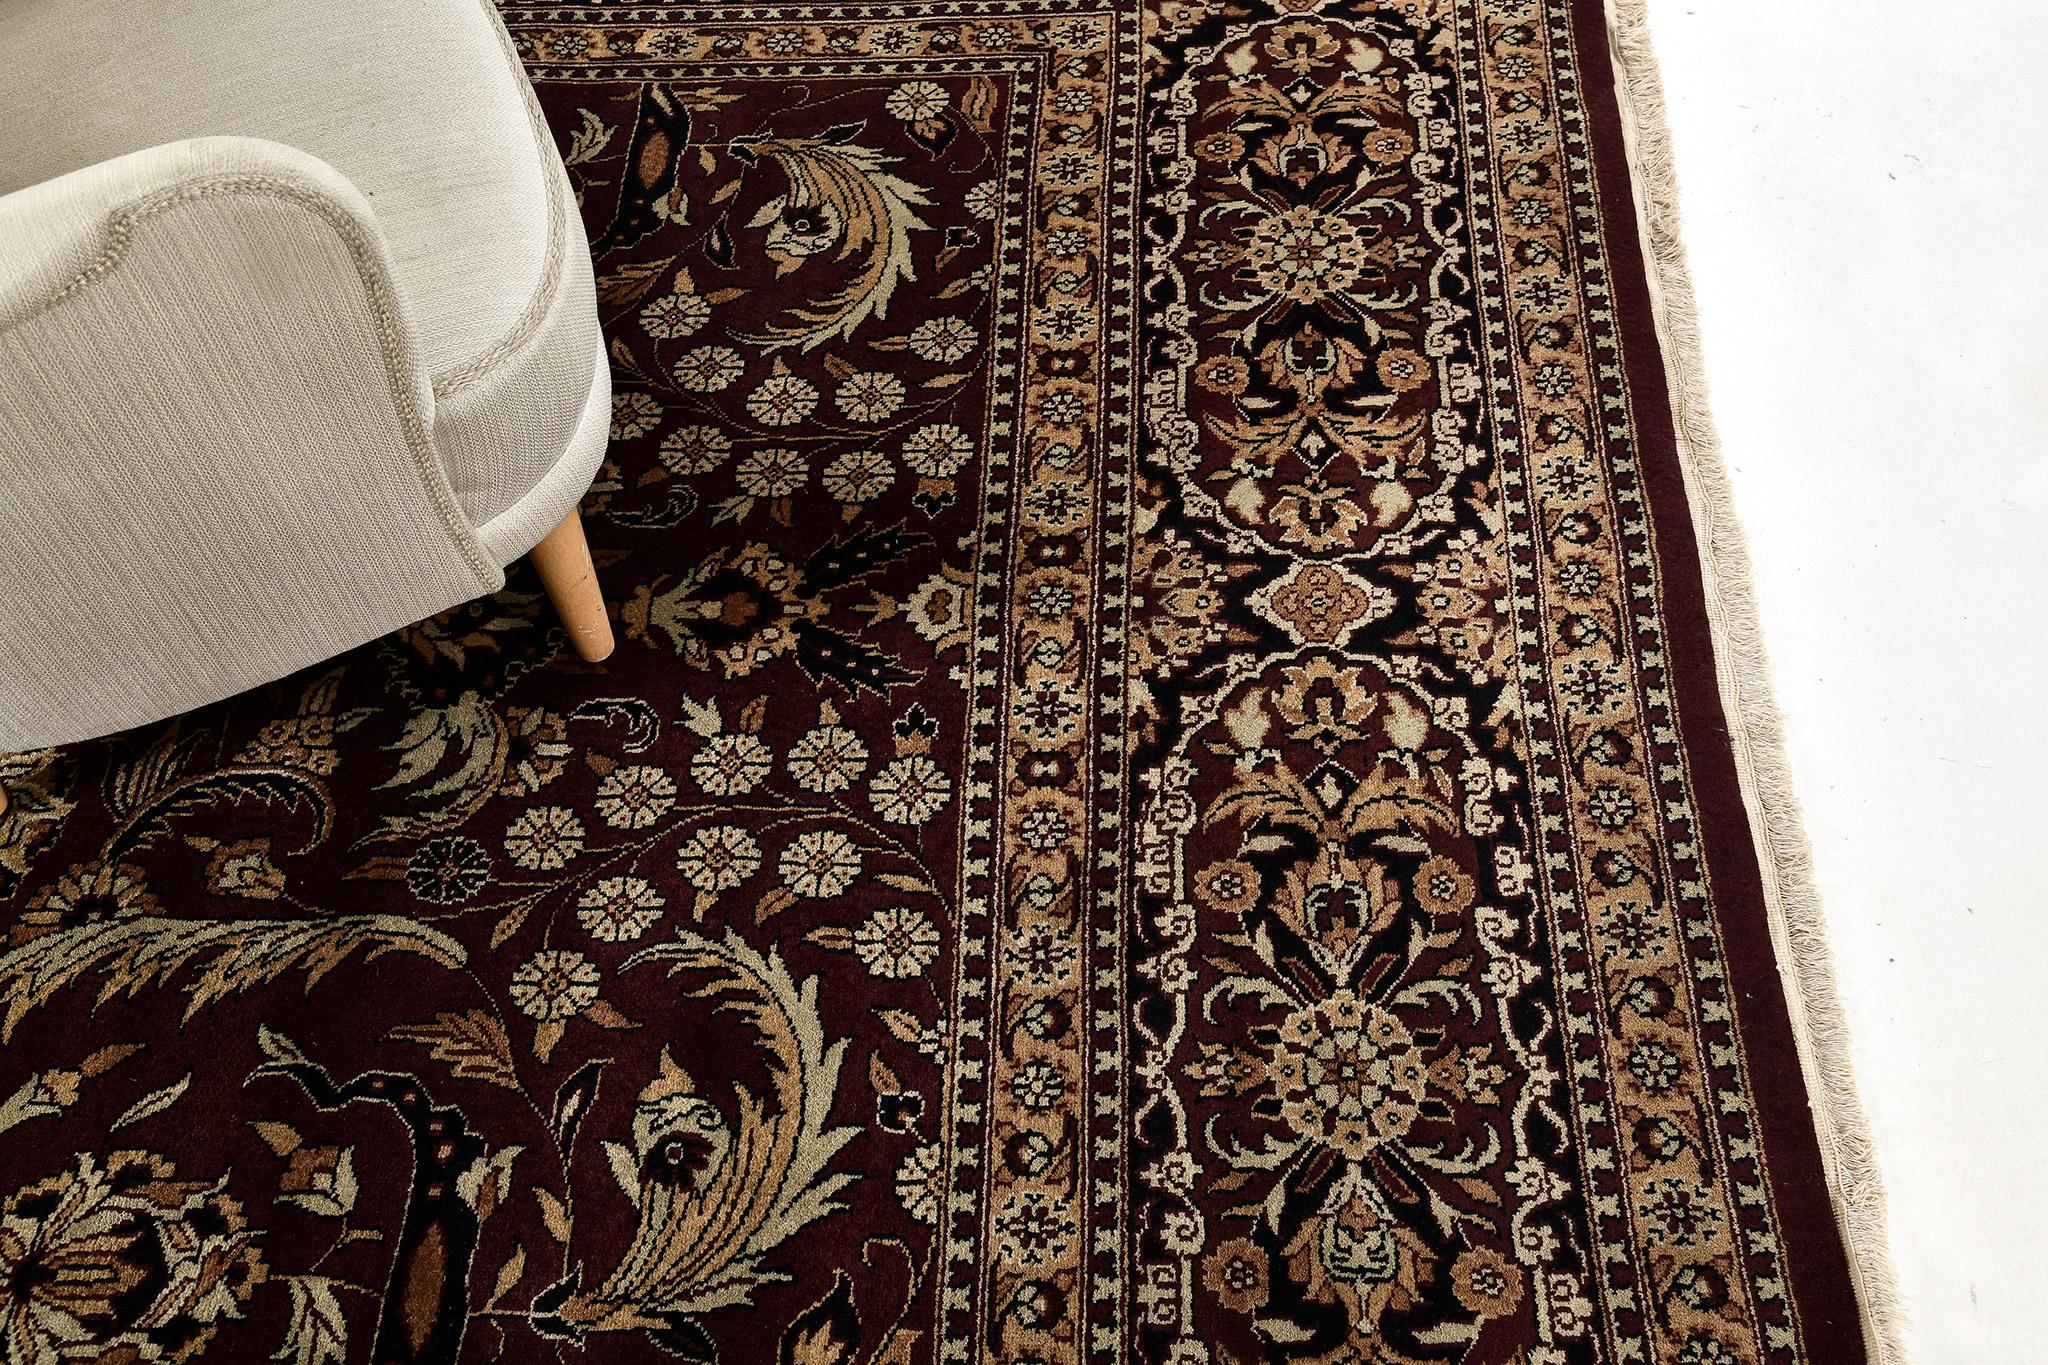 A majestic Indo Jaipur Agra Rug features excellent elements that the color schemes stand out among the rest. It creates a delicate balance between the value of motifs and the overall impression of the design. Excellent addition to any room that can